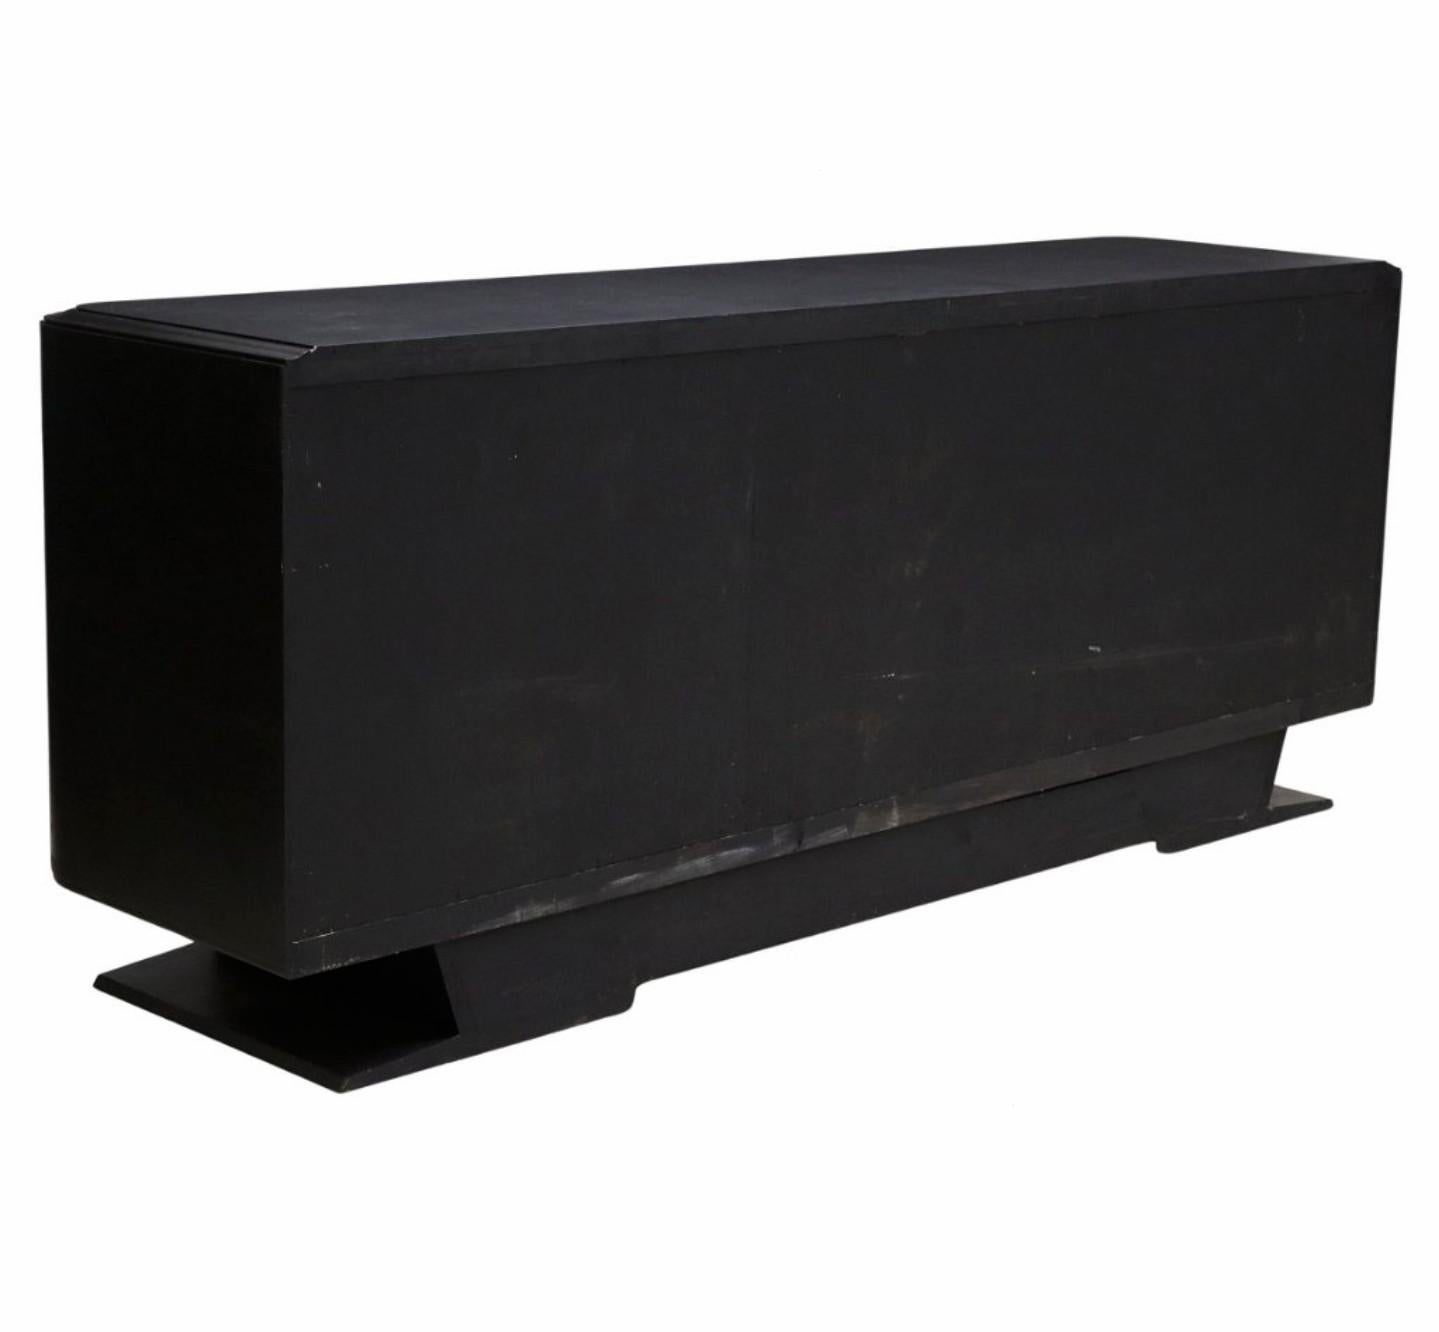 French Art Deco Moderne Painted Black Credenza Sideboard  5